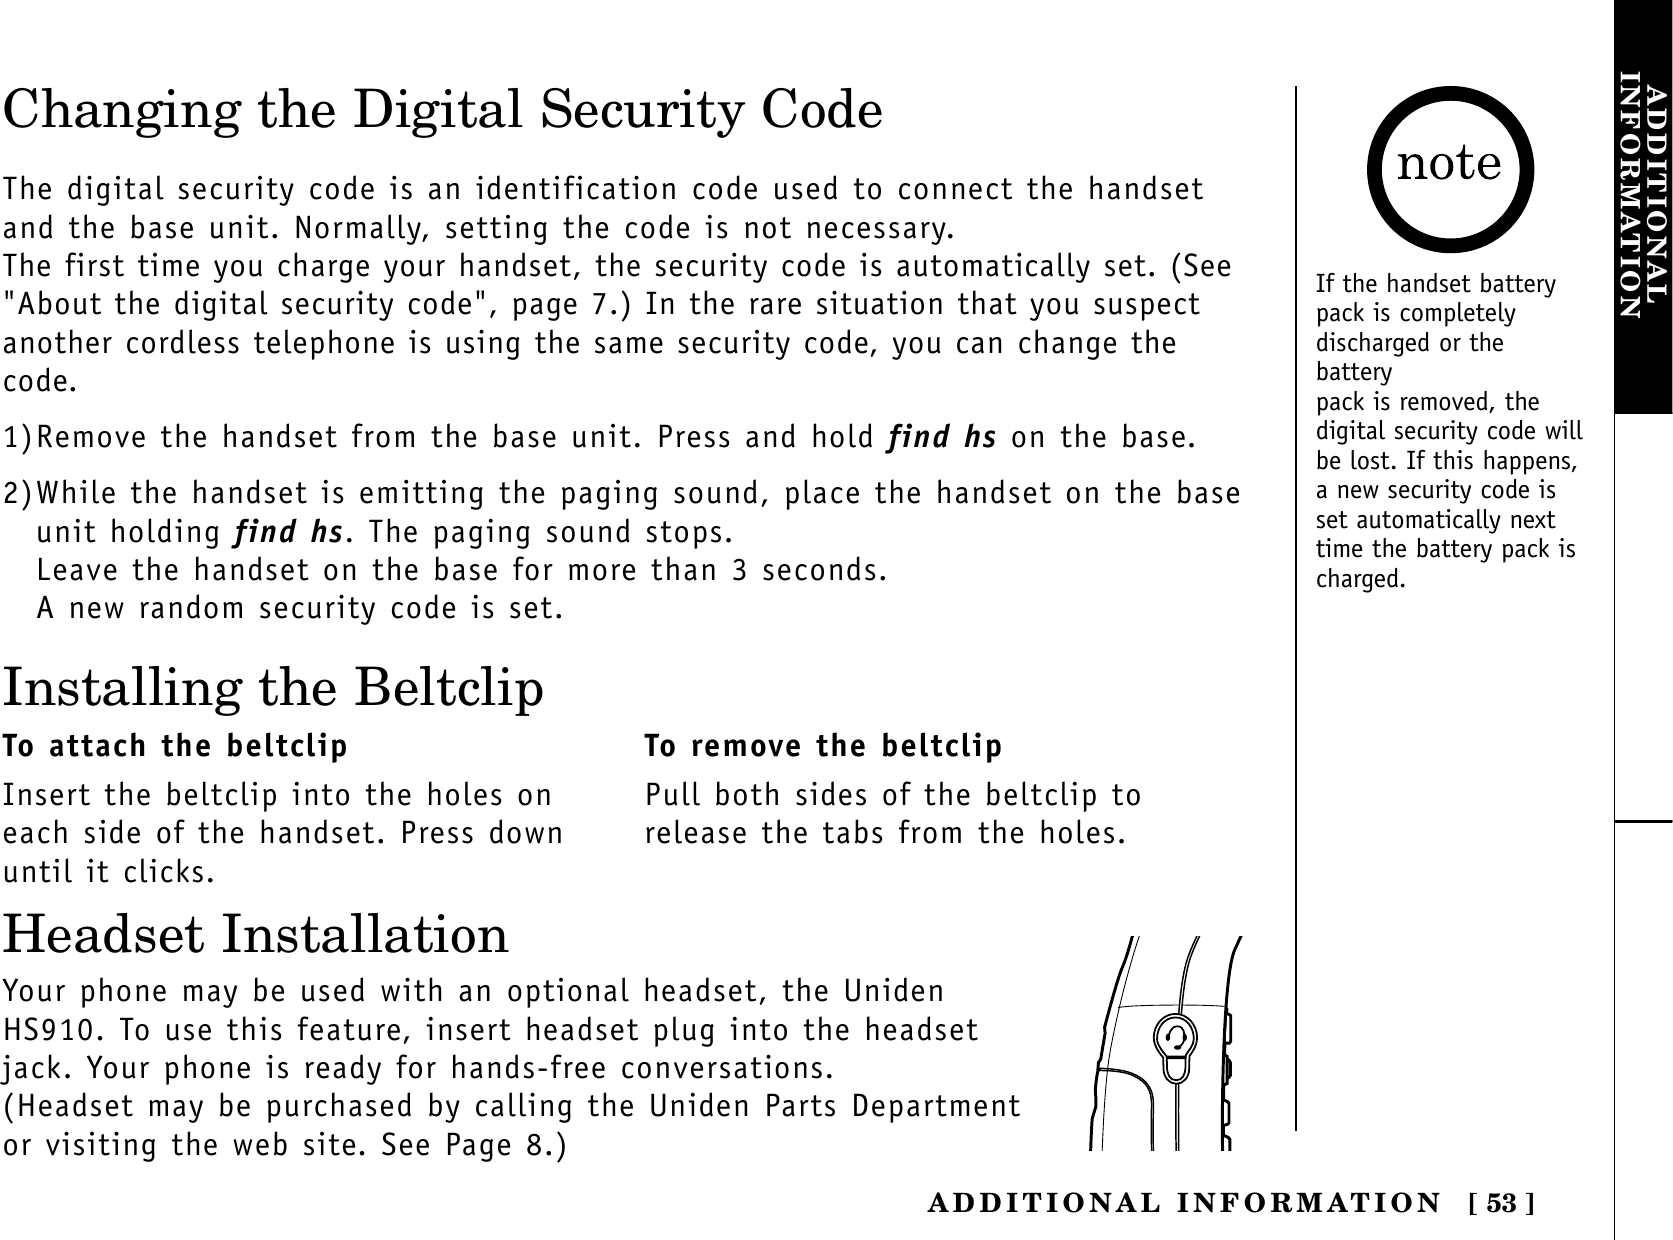 [ 53 ]ADDITIONAL INFORMATIONADDITIONALINFORMATIONChanging the Digital Security CodeThe digital security code is an identification code used to connect the handsetand the base unit. Normally, setting the code is not necessary.The first time you charge your handset, the security code is automatically set. (See&quot;About the digital security code&quot;, page 7.) In the rare situation that you suspectanother cordless telephone is using the same security code, you can change thecode.1)Remove the handset from the base unit. Press and hold find hs on the base.2)While the handset is emitting the paging sound, place the handset on the baseunit holding find hs. The paging sound stops.Leave the handset on the base for more than 3 seconds.A new random security code is set.Installing the BeltclipTo attach the beltclipInsert the beltclip into the holes oneach side of the handset. Press downuntil it clicks.To remove the beltclipPull both sides of the beltclip torelease the tabs from the holes.Your phone may be used with an optional headset, the UnidenHS910. To use this feature, insert headset plug into the headsetjack. Your phone is ready for hands-free conversations.(Headset may be purchased by calling the Uniden Parts Departmentor visiting the web site. See Page 8.)Headset InstallationIf the handset batterypack is completelydischarged or thebatterypack is removed, thedigital security code willbe lost. If this happens,a new security code isset automatically nexttime the battery pack ischarged.